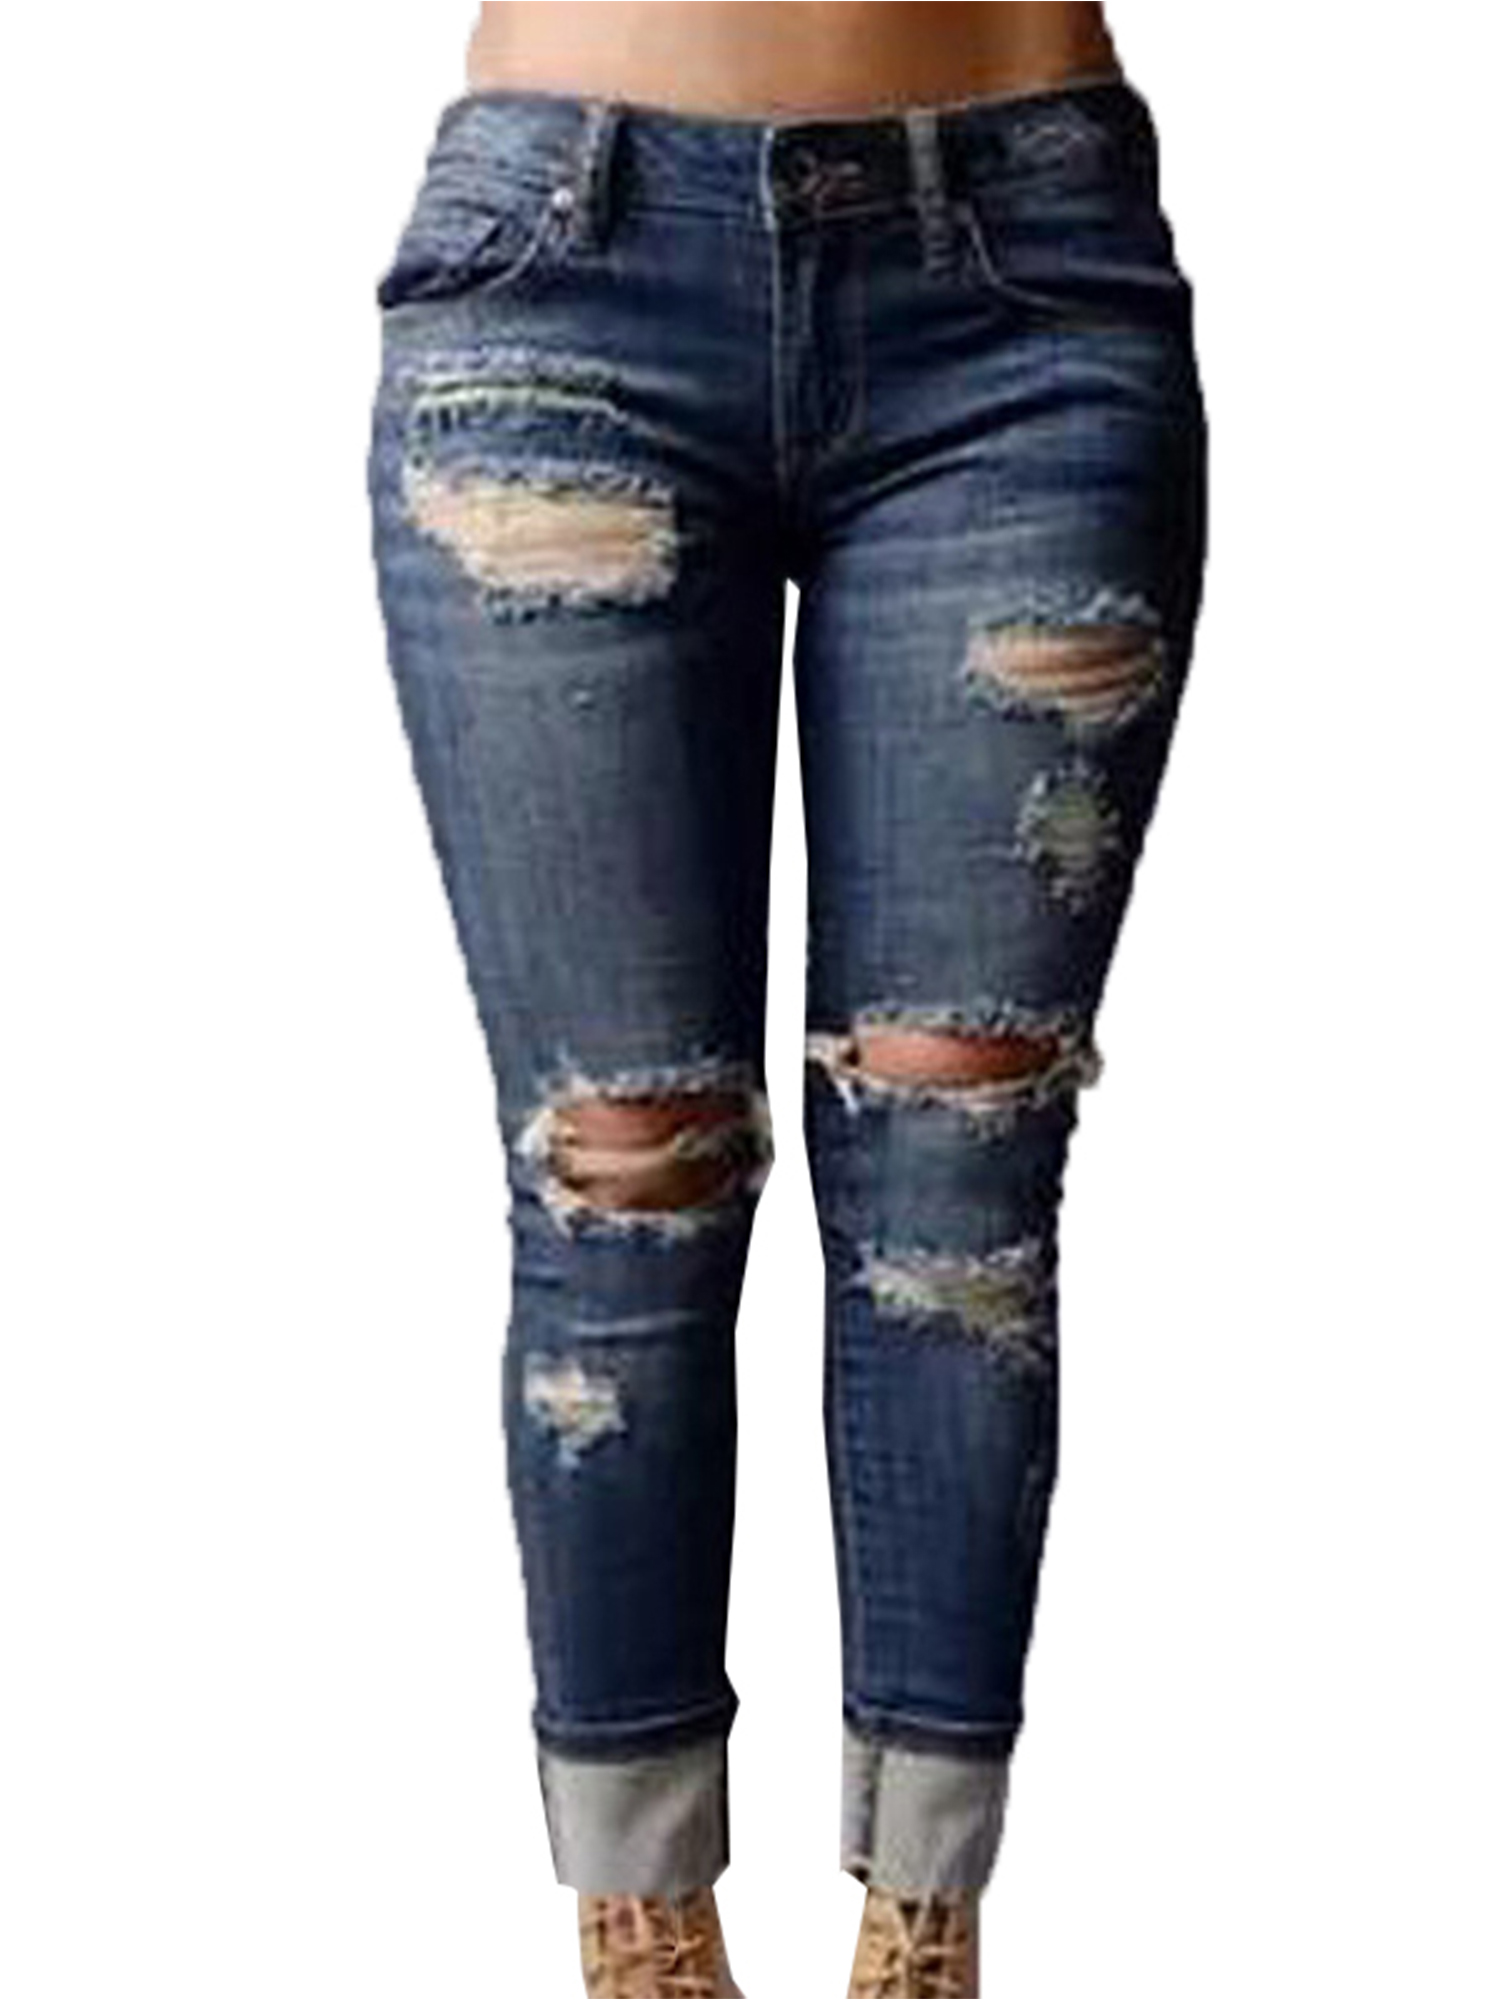 Womens Stretch Pull-On Skinny Ripped Distressed Denim Jeggings Regular-Plus Size